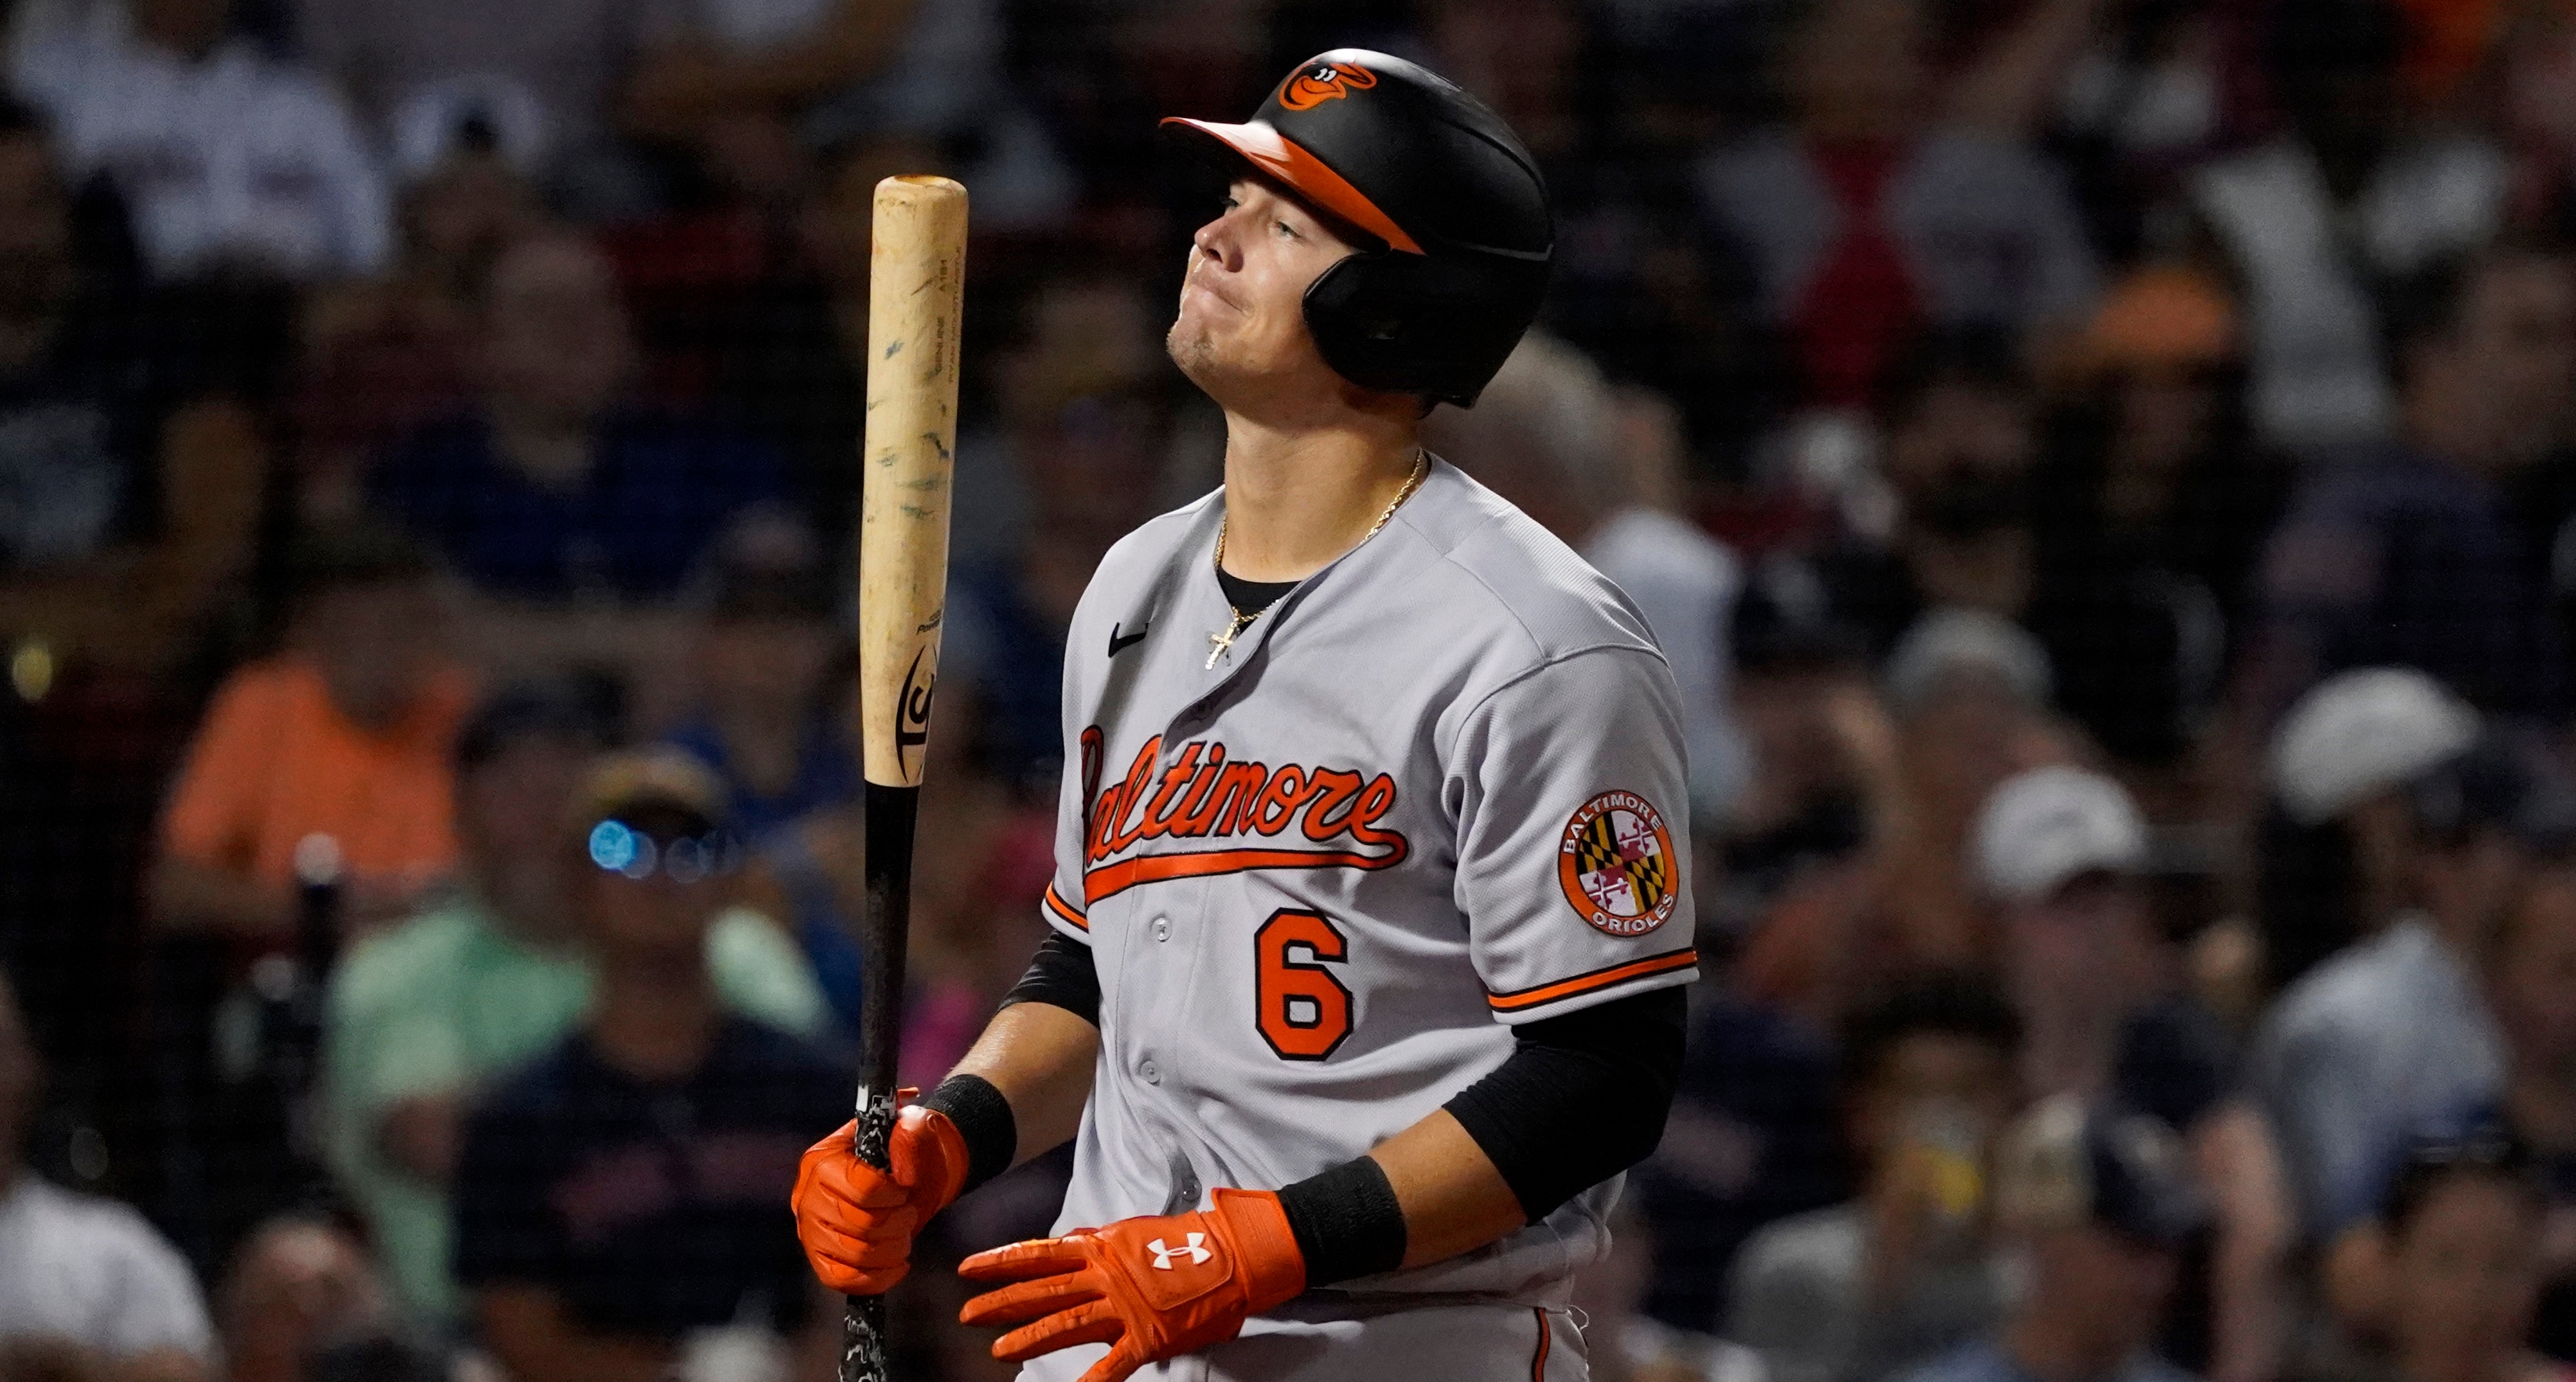 Orioles lose a heartbreaker to the Red Sox on Mother's Day, 4-3